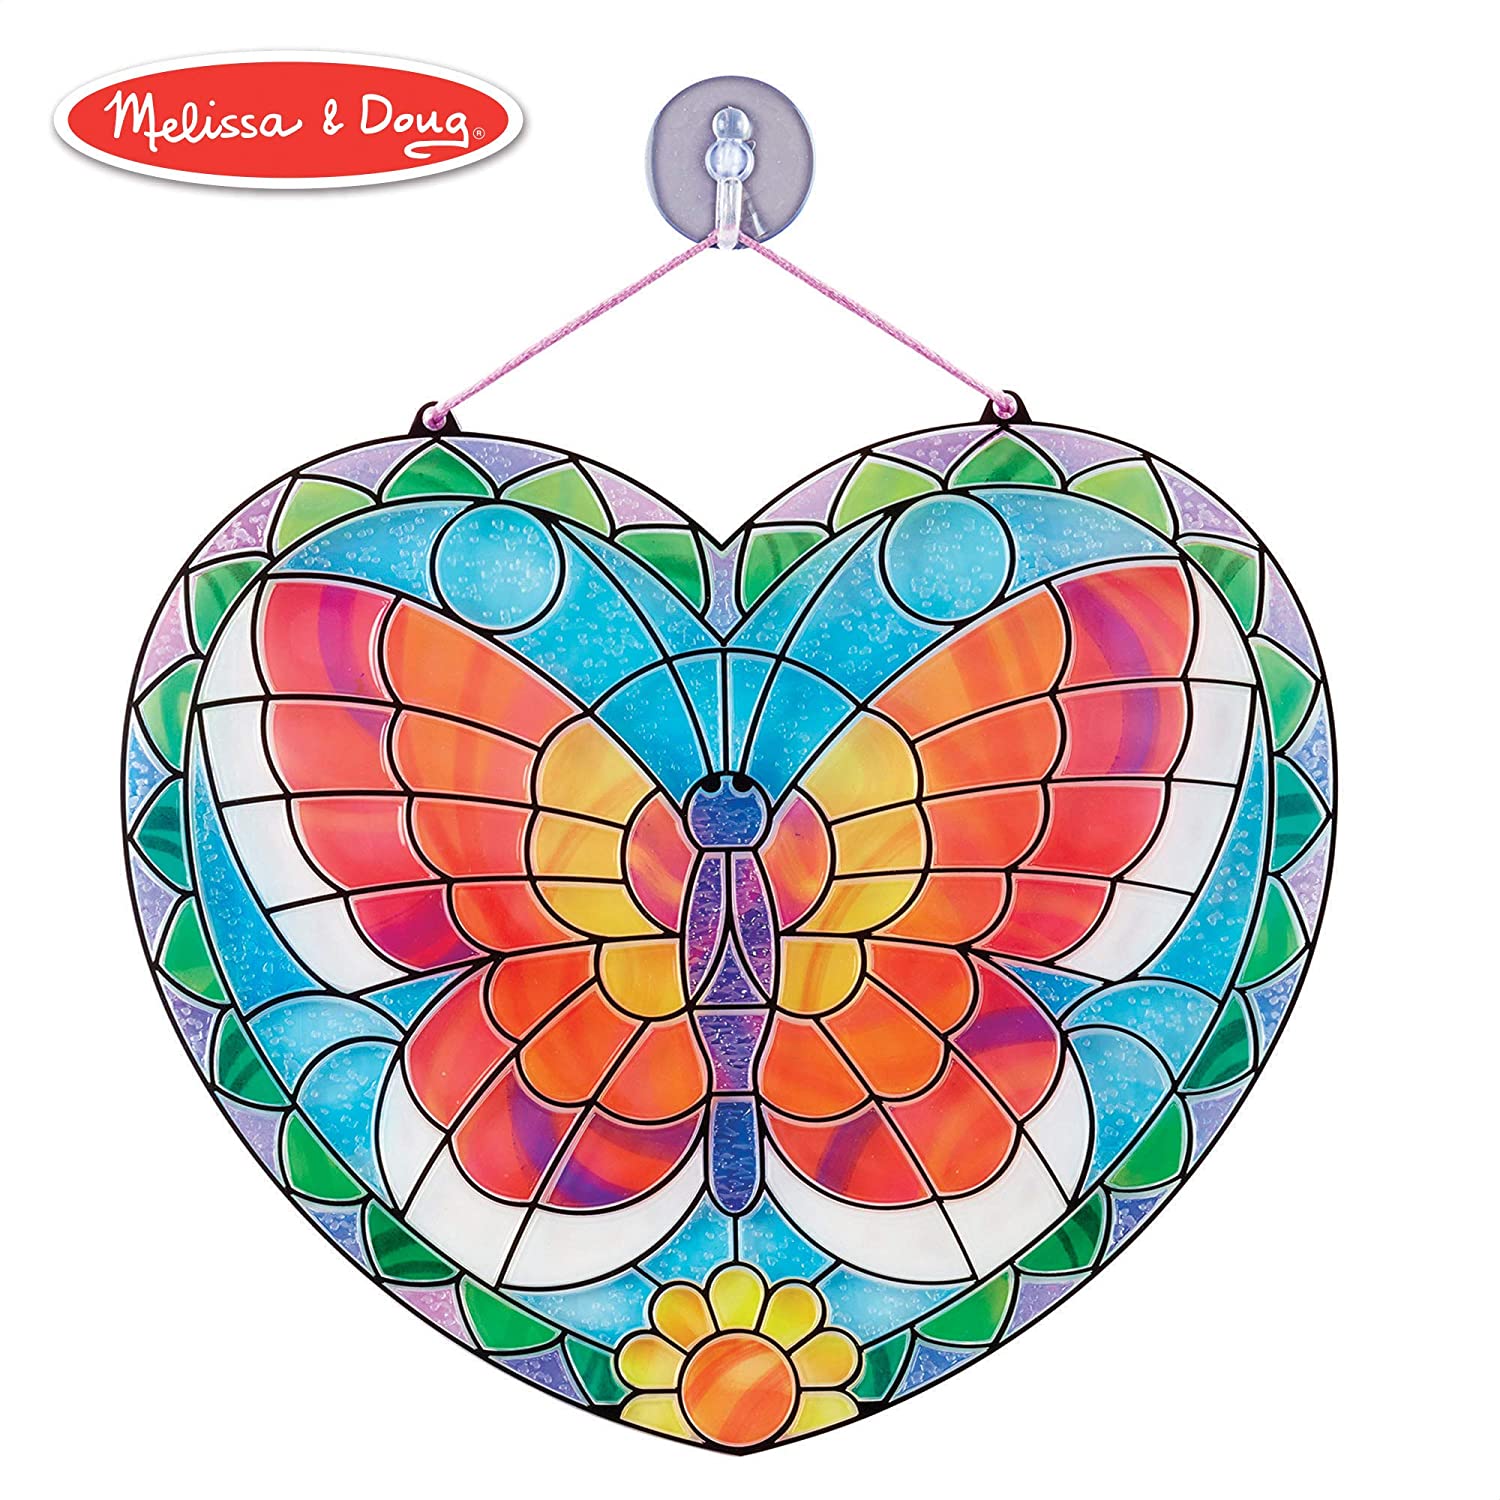 Melissa & Doug Stained Glass Made Easy Activity Kit, Arts and Crafts